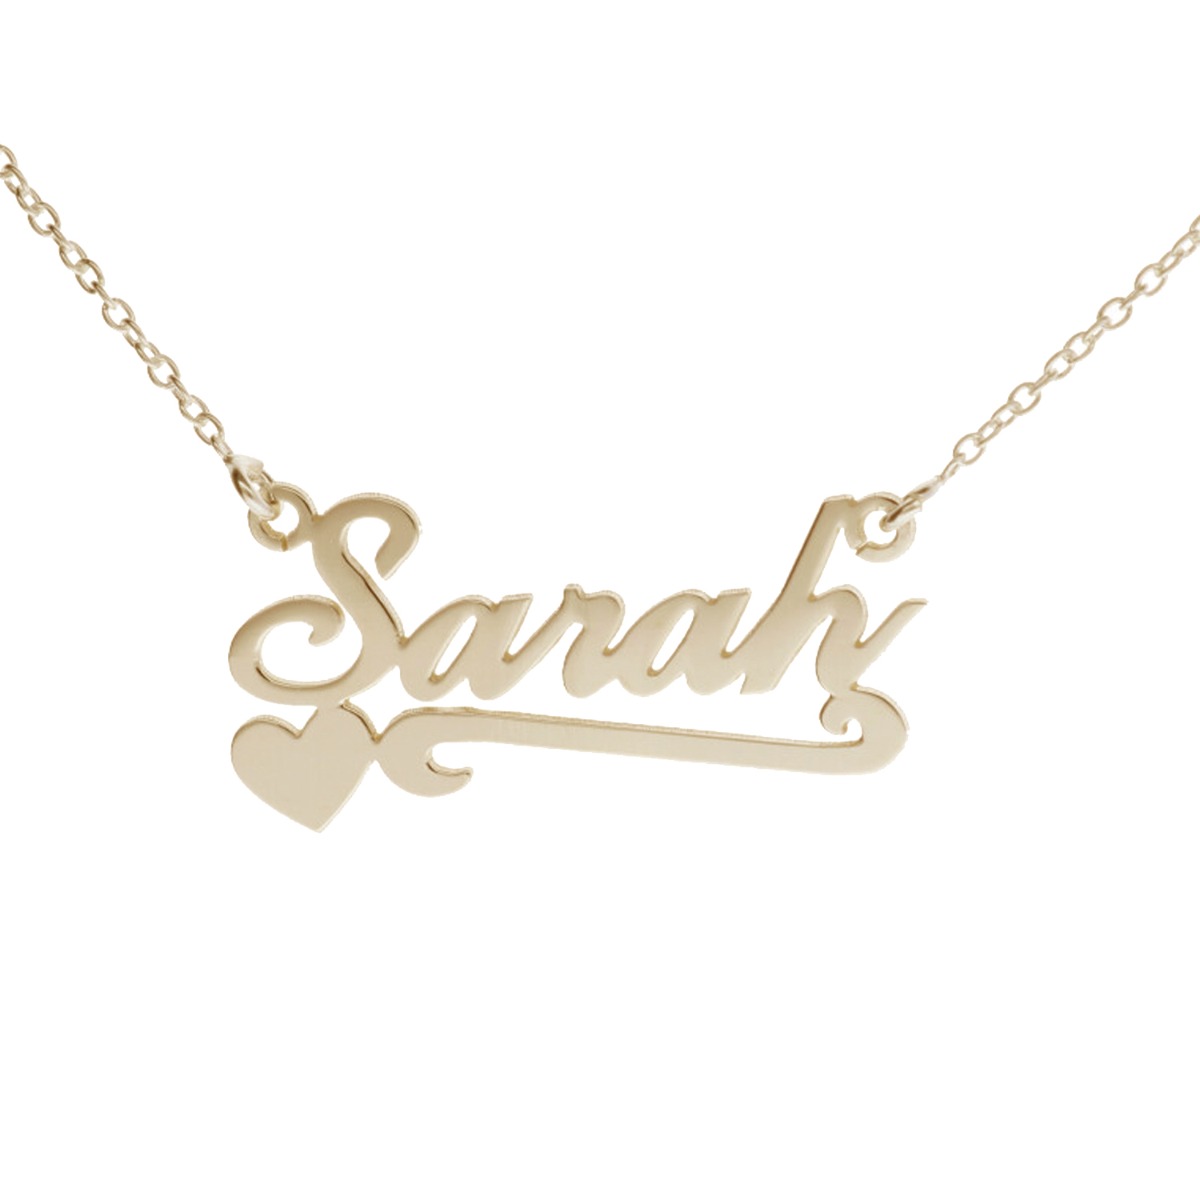 9ct Yellow Gold Plated Carrie Style Personalised Name Necklace With Heart & Scroll